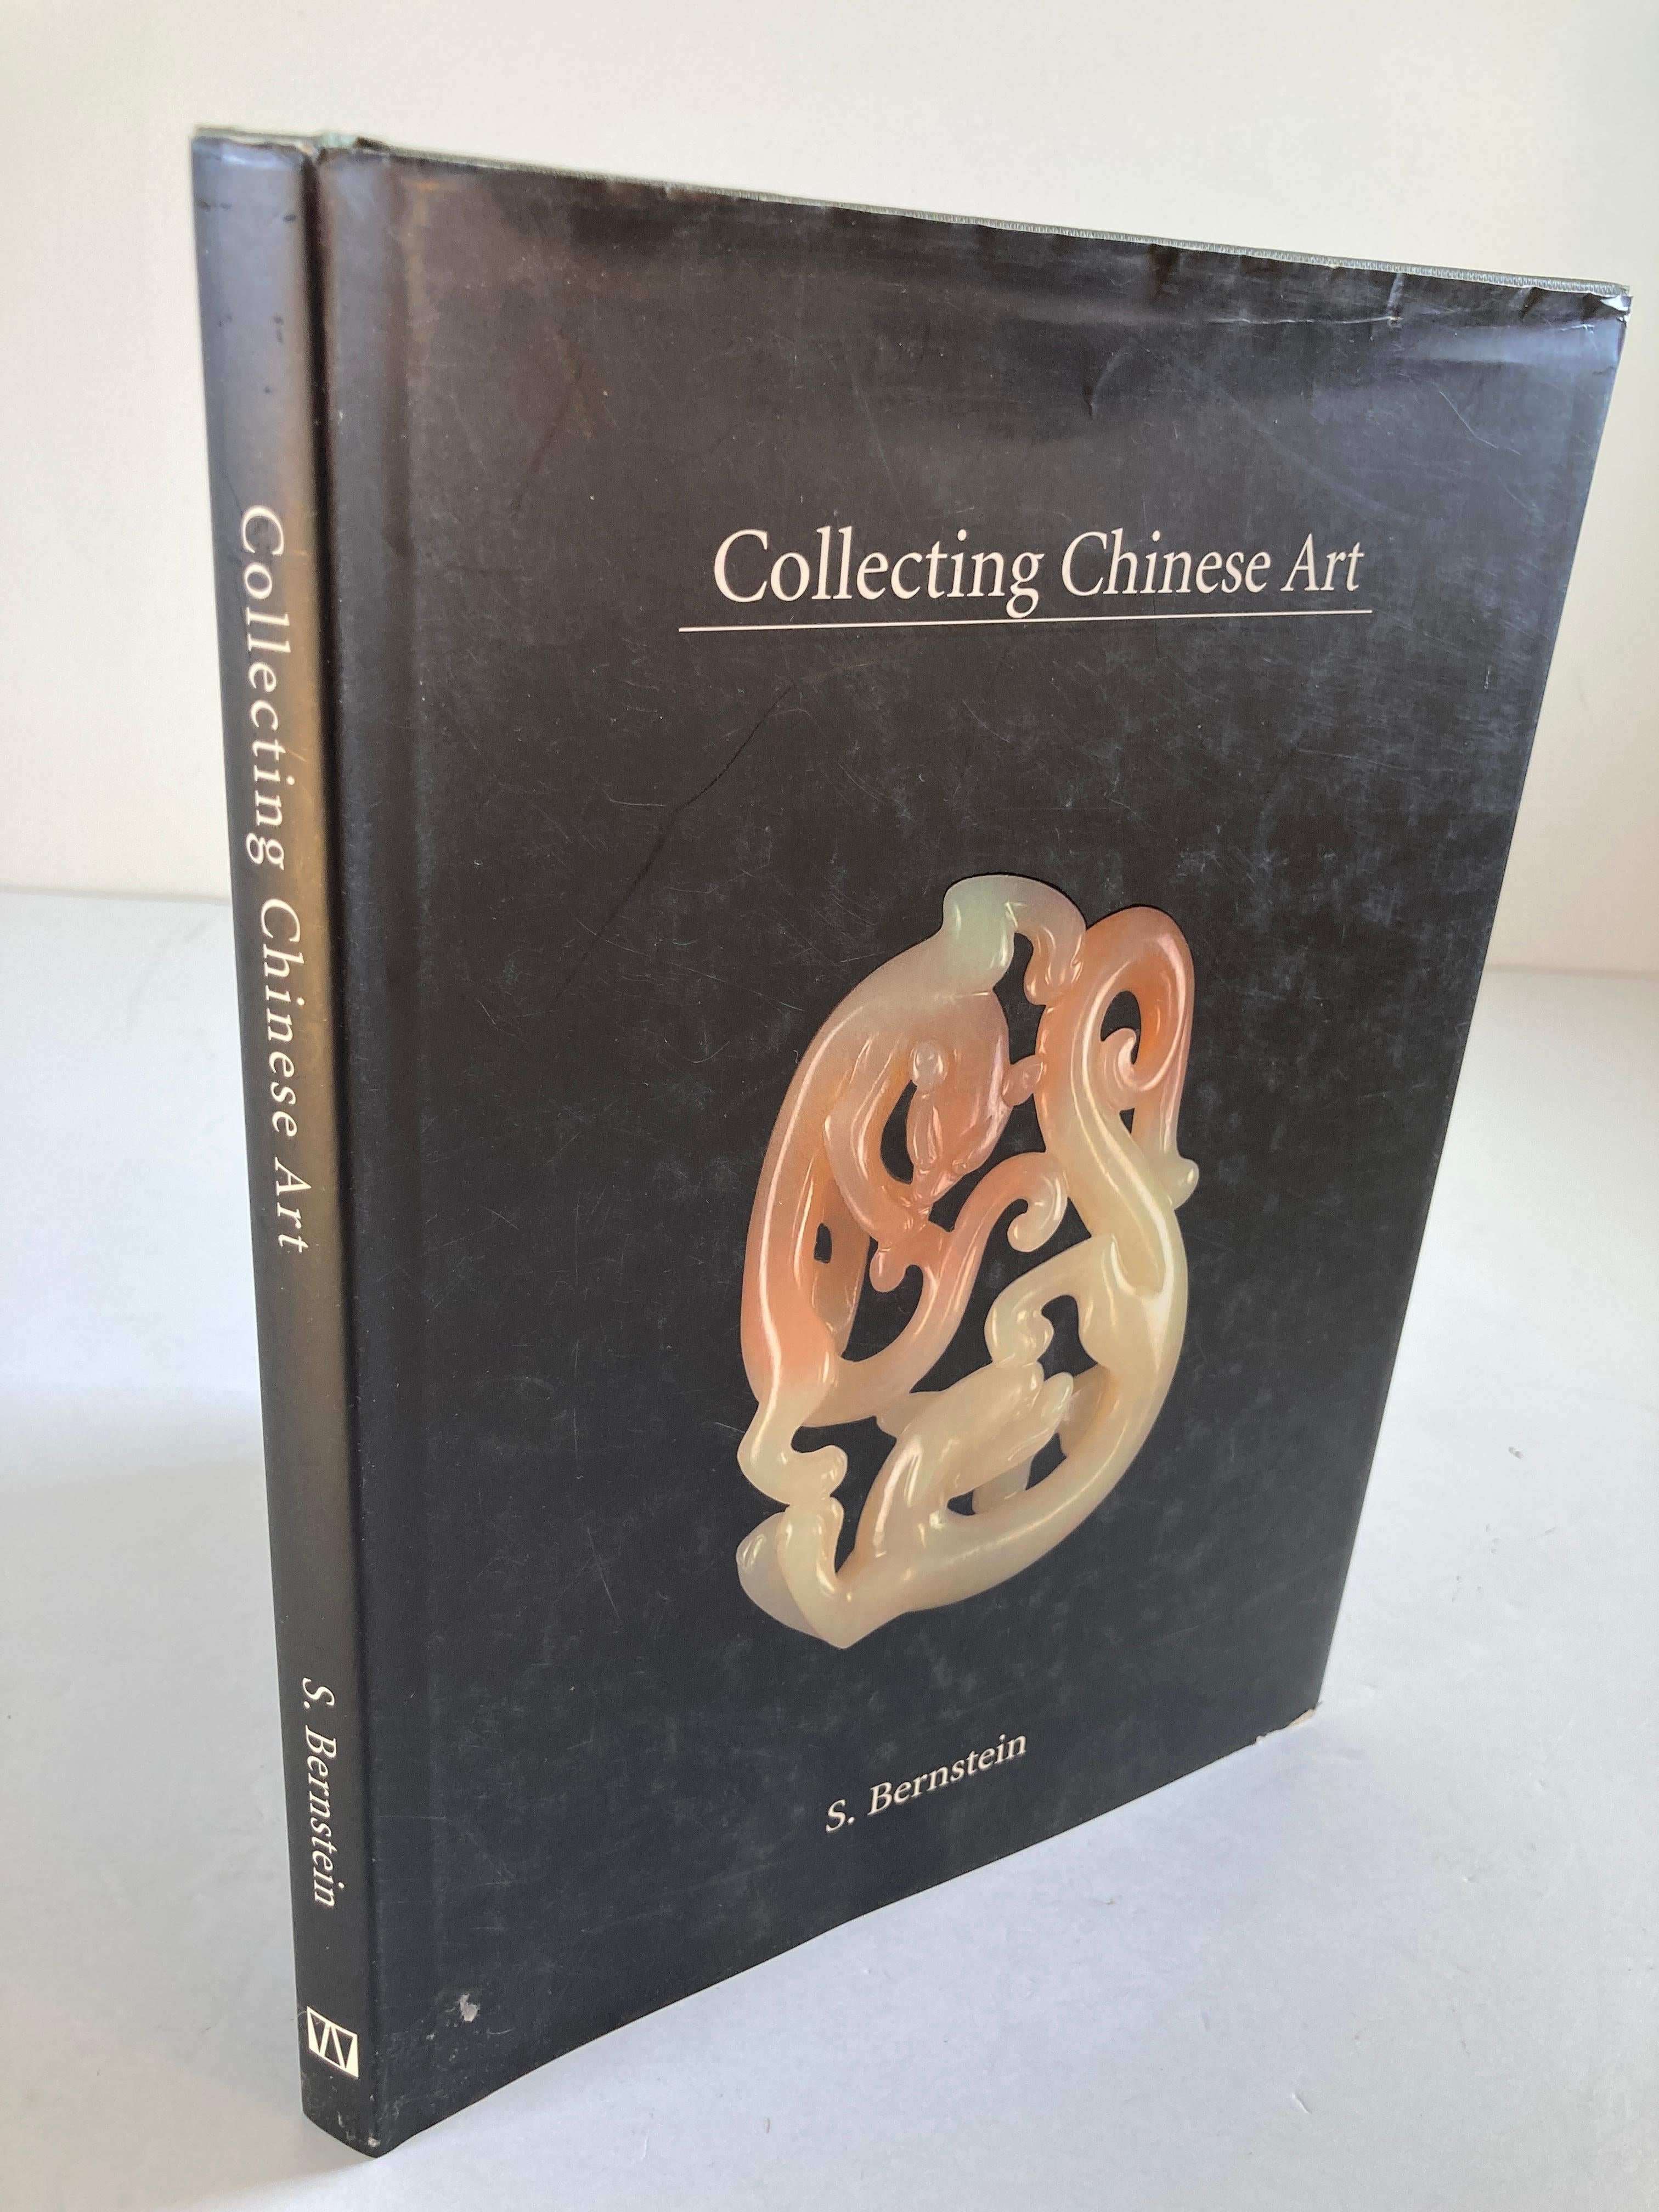 Collecting Chinese Art Book by Sam Bernstein In Good Condition For Sale In North Hollywood, CA